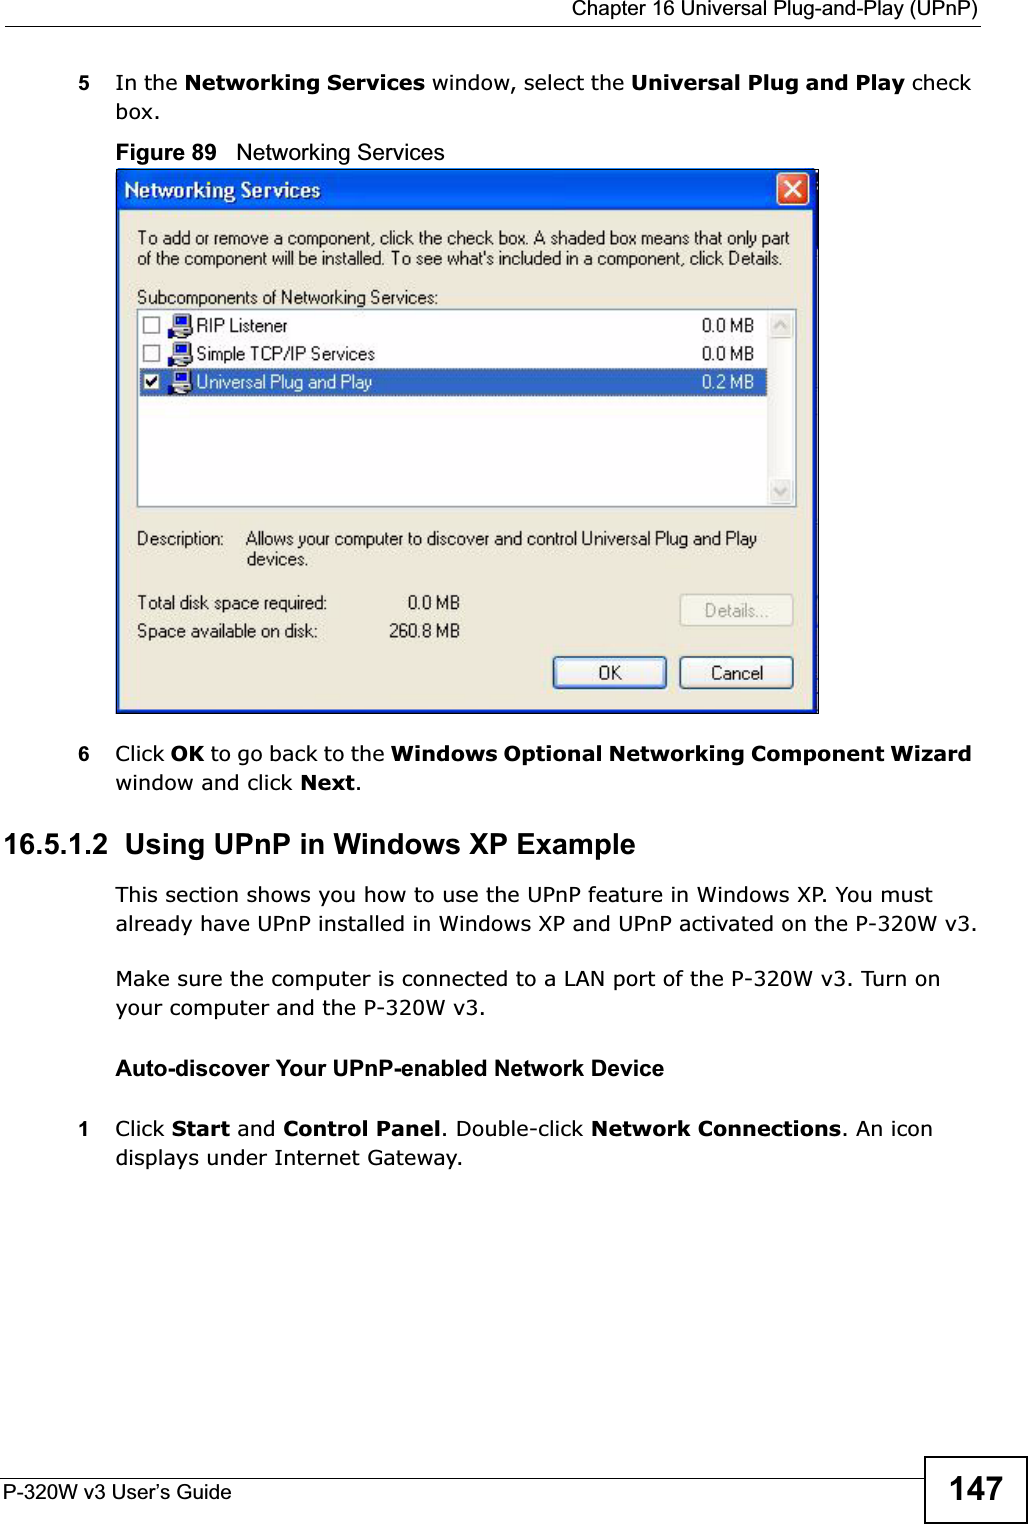  Chapter 16 Universal Plug-and-Play (UPnP)P-320W v3 User’s Guide 1475In the Networking Services window, select the Universal Plug and Play check box. Figure 89   Networking Services6Click OK to go back to the Windows Optional Networking Component Wizard window and click Next.16.5.1.2  Using UPnP in Windows XP ExampleThis section shows you how to use the UPnP feature in Windows XP. You must already have UPnP installed in Windows XP and UPnP activated on the P-320W v3.Make sure the computer is connected to a LAN port of the P-320W v3. Turn on your computer and the P-320W v3. Auto-discover Your UPnP-enabled Network Device1Click Start and Control Panel. Double-click Network Connections. An icon displays under Internet Gateway.